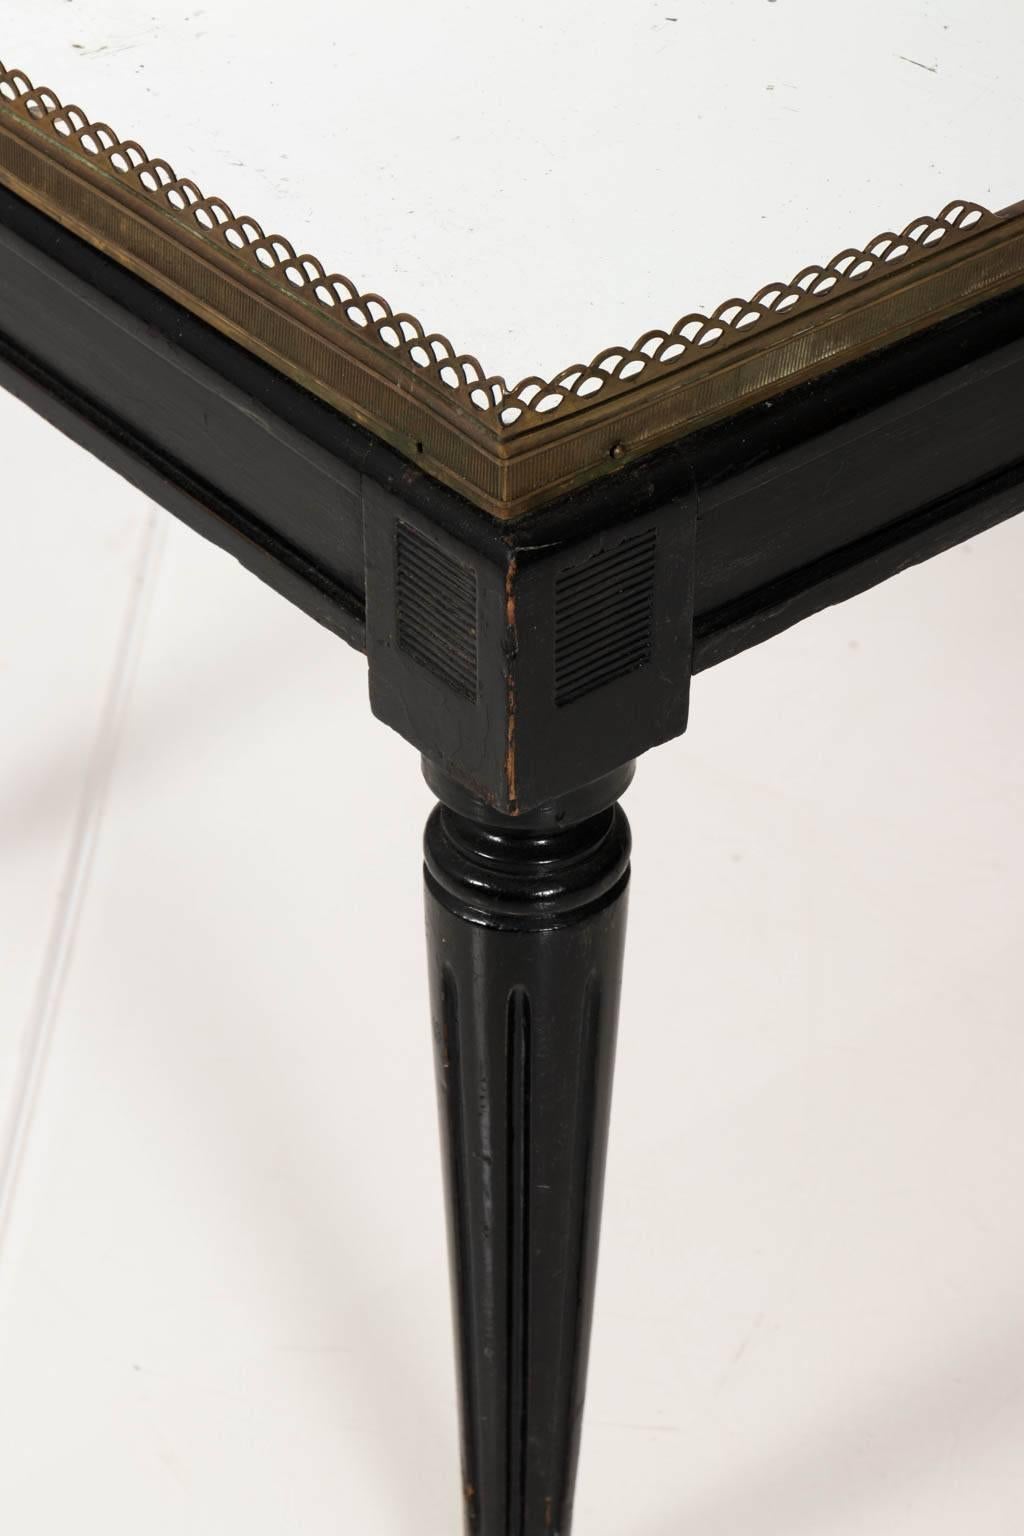 Neoclassical Revival French Brass and Black Glass Coffee Table